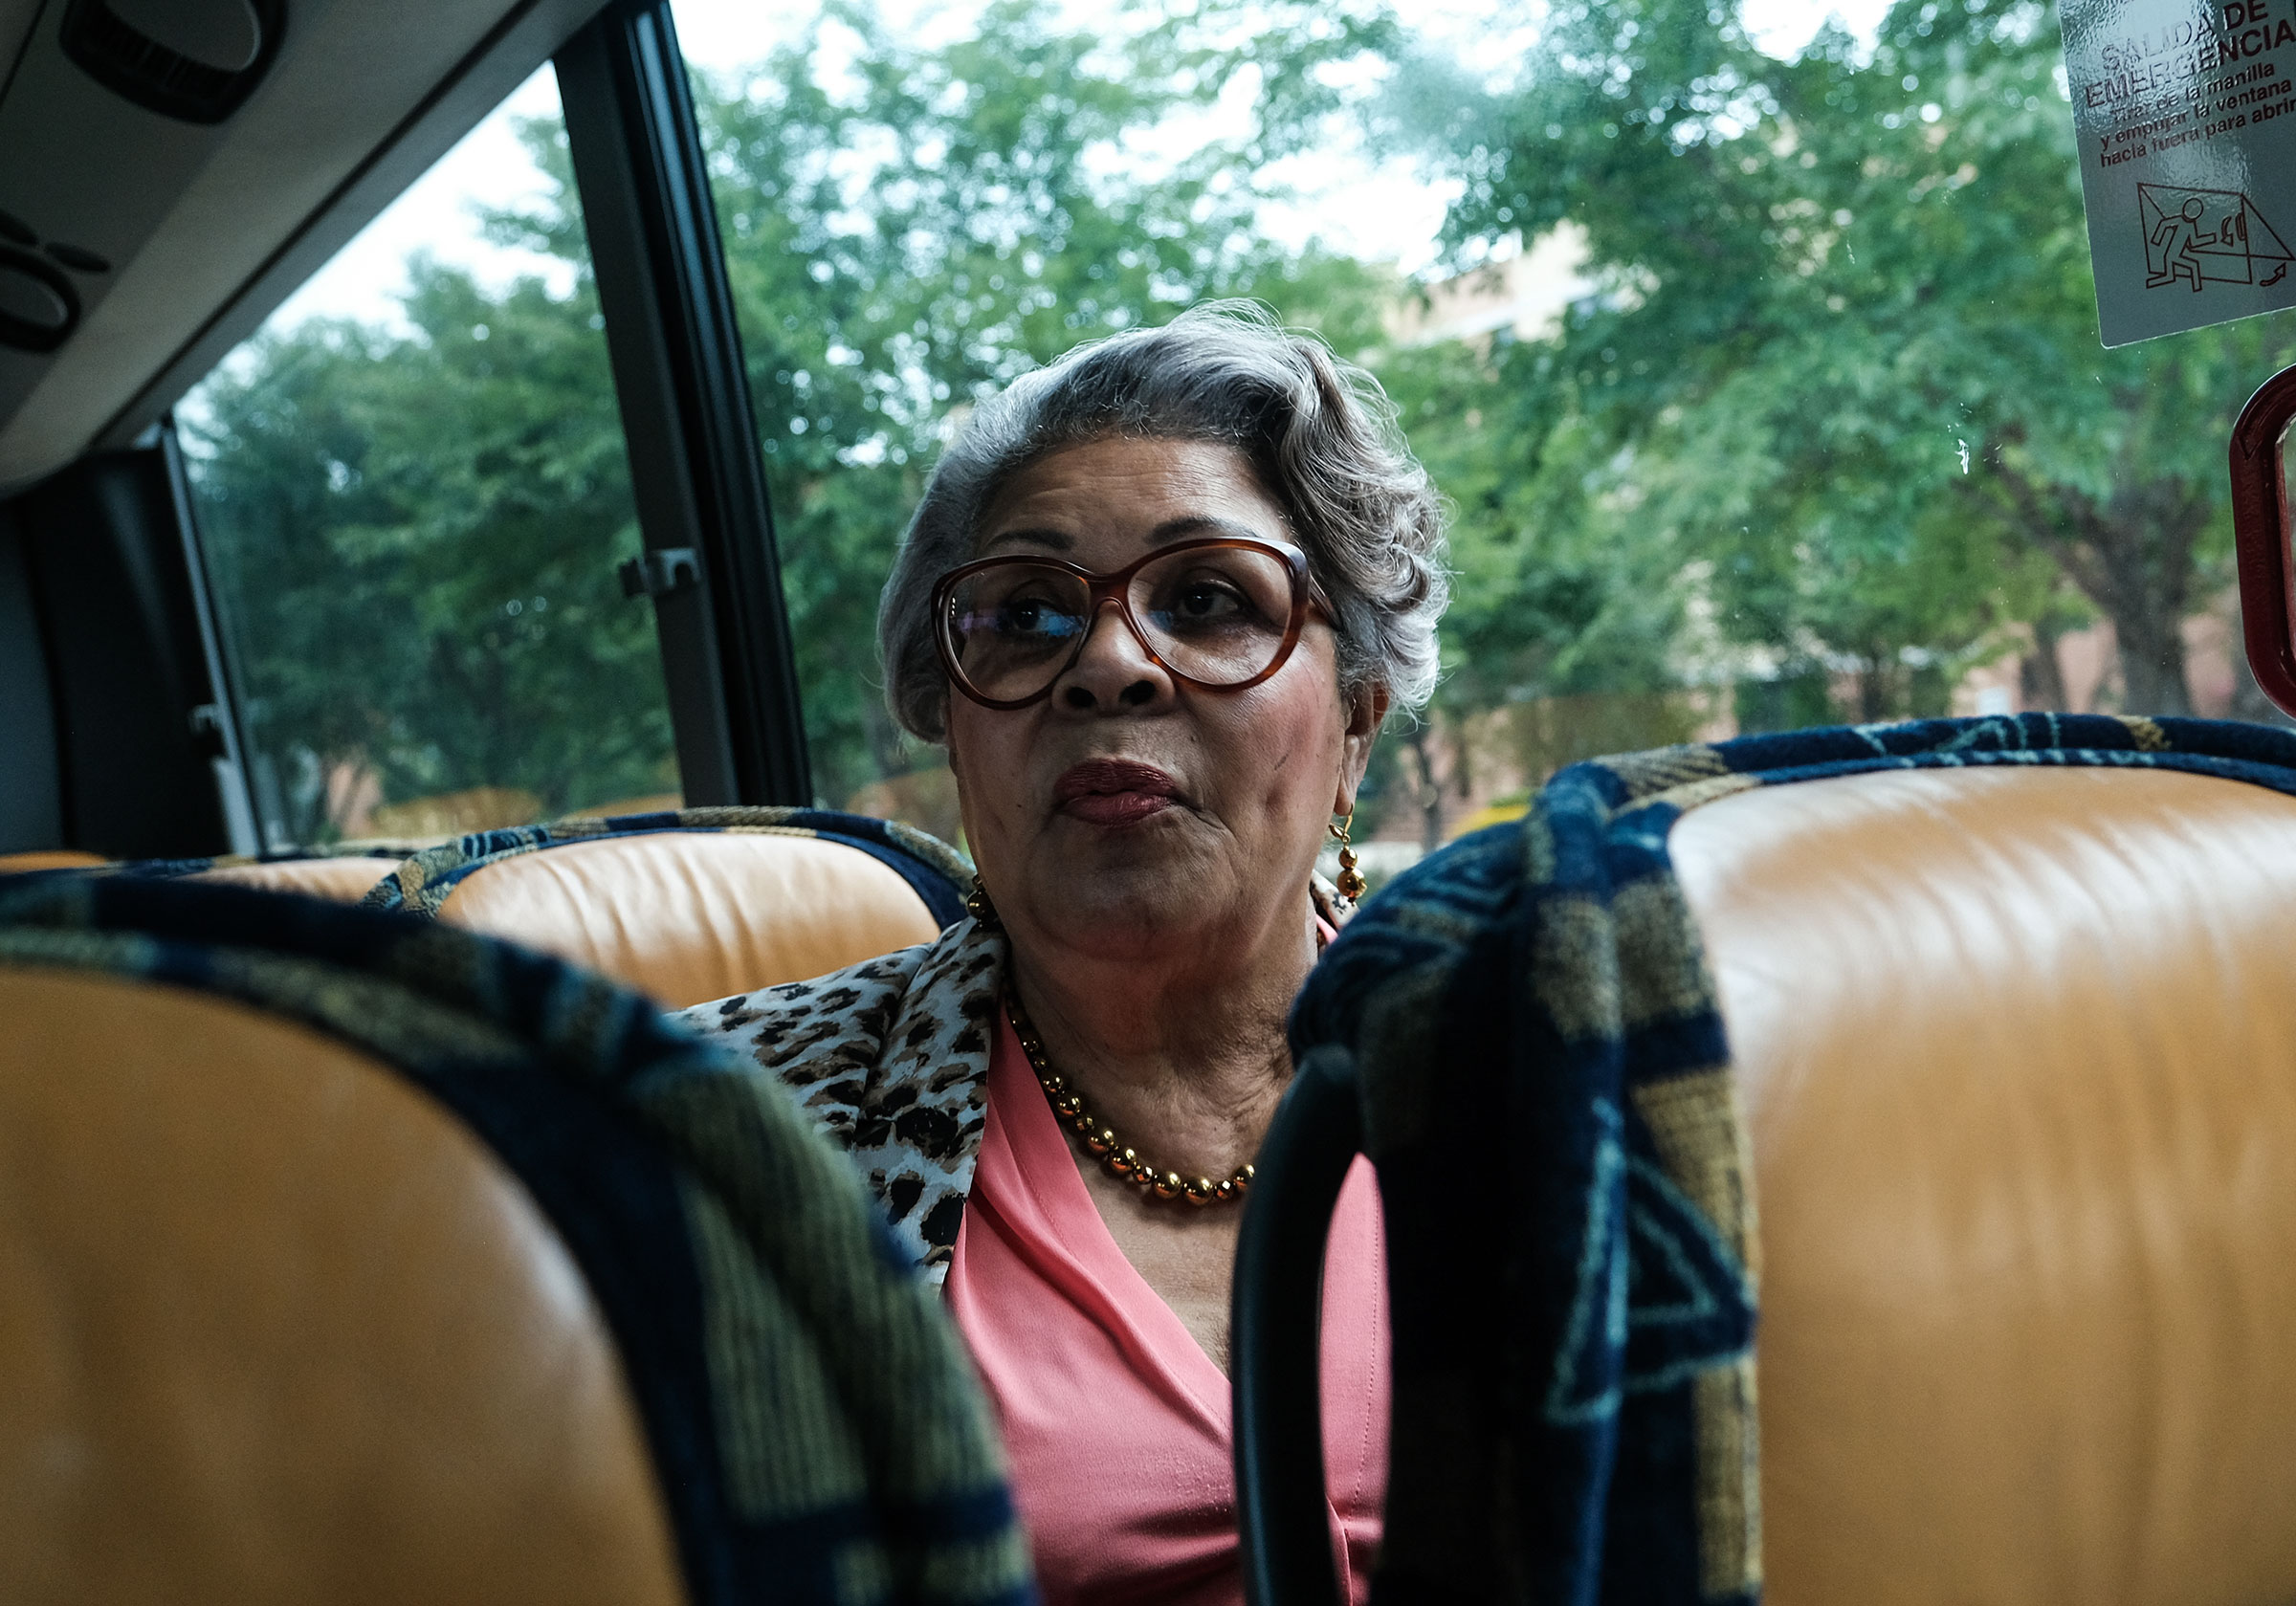 Rep. Thompson on a bus during an interview with a journalist in Washington, D.C., on July 16. (Michael A. McCoy for TIME)